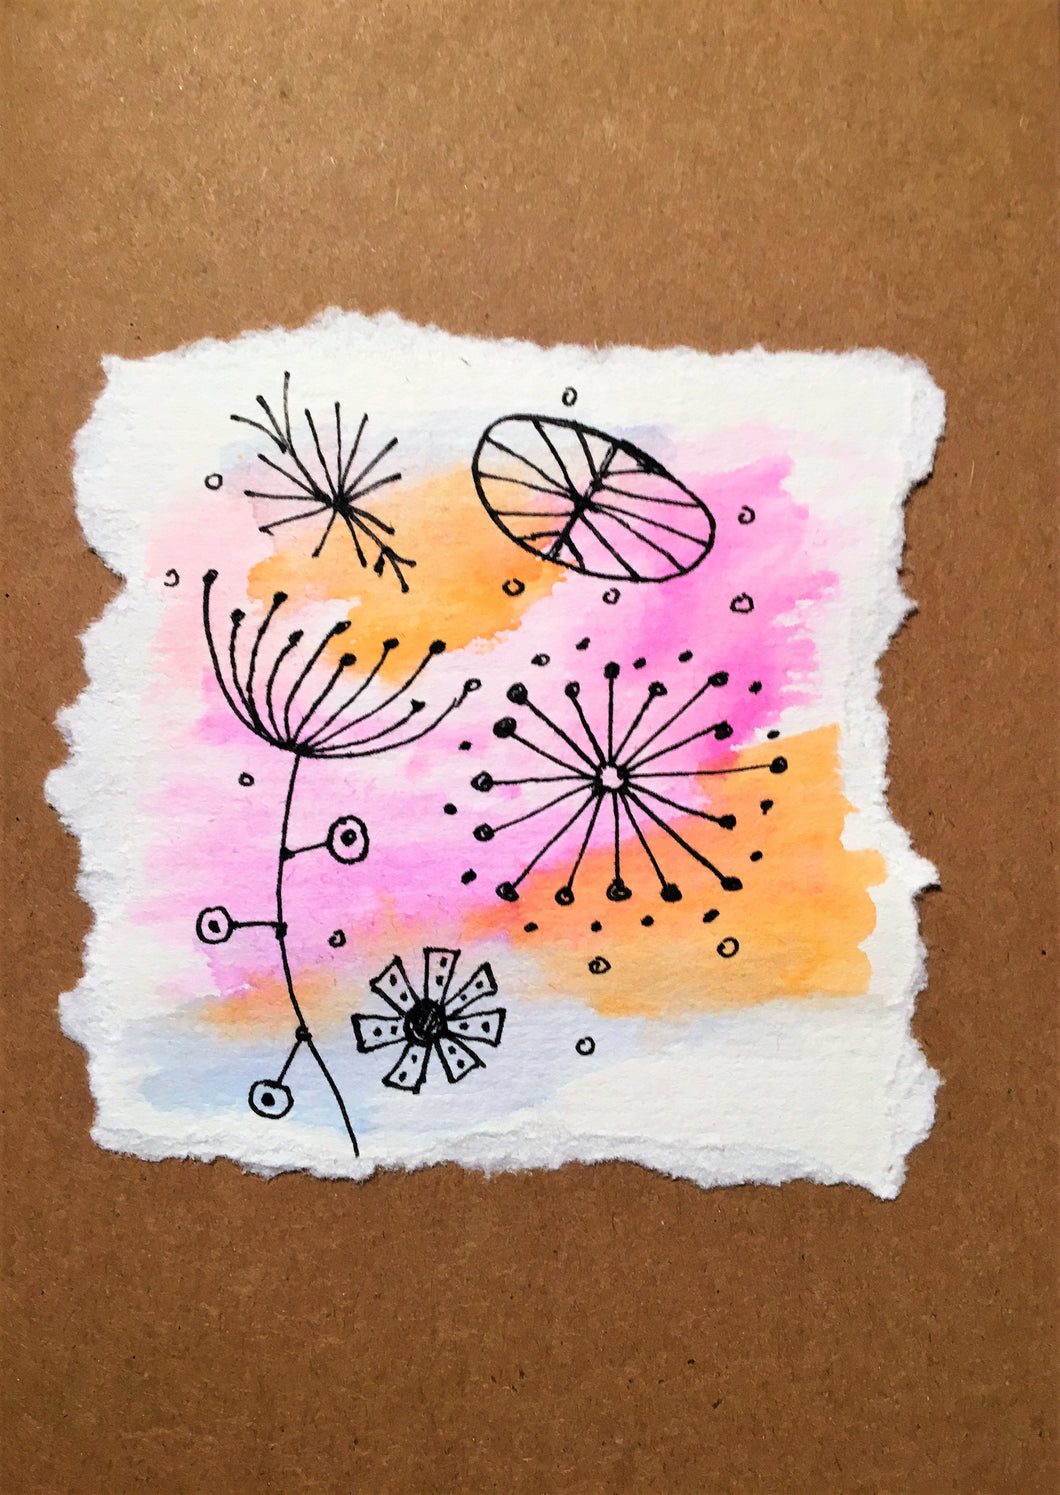 Hand painted greeting card - Abstract Ink Design on Pink/Orange/Blue Waterclour - eDgE dEsiGn London